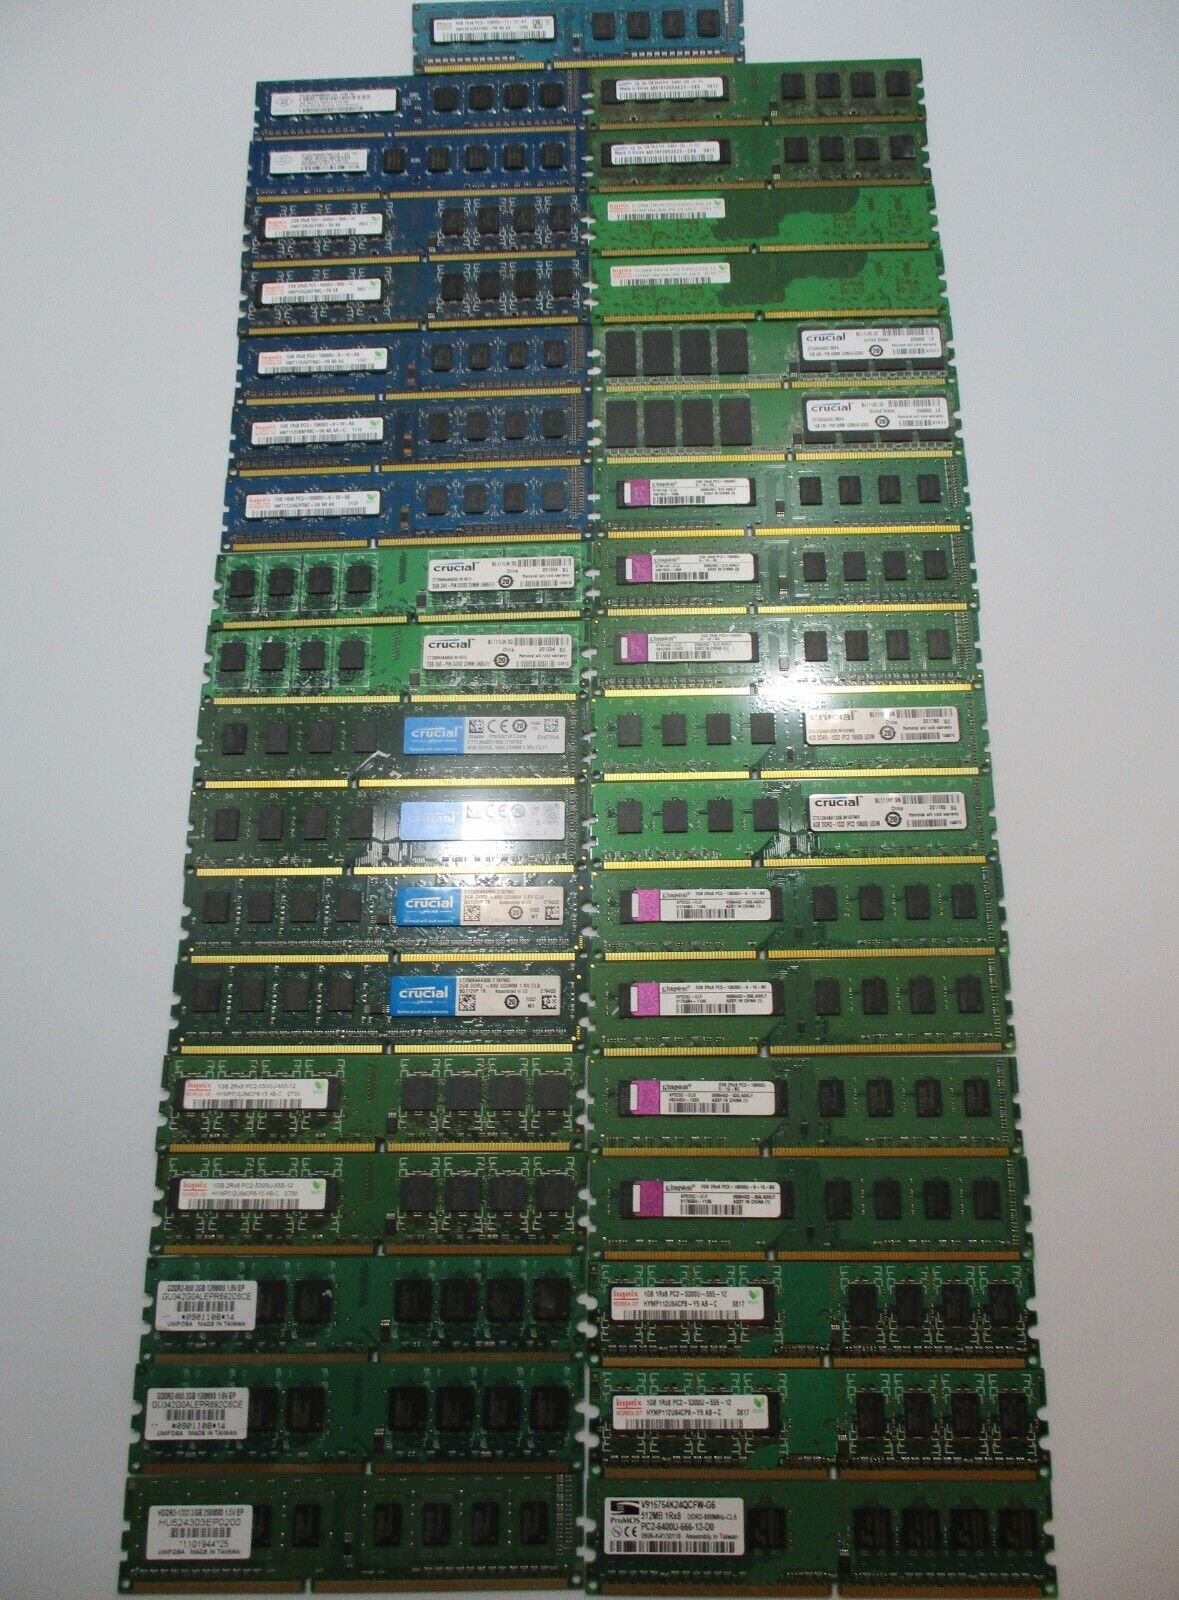 Lot of 37 Desktop RAM Memory Boards Several Brands Mixed Capacities Mostly Pairs